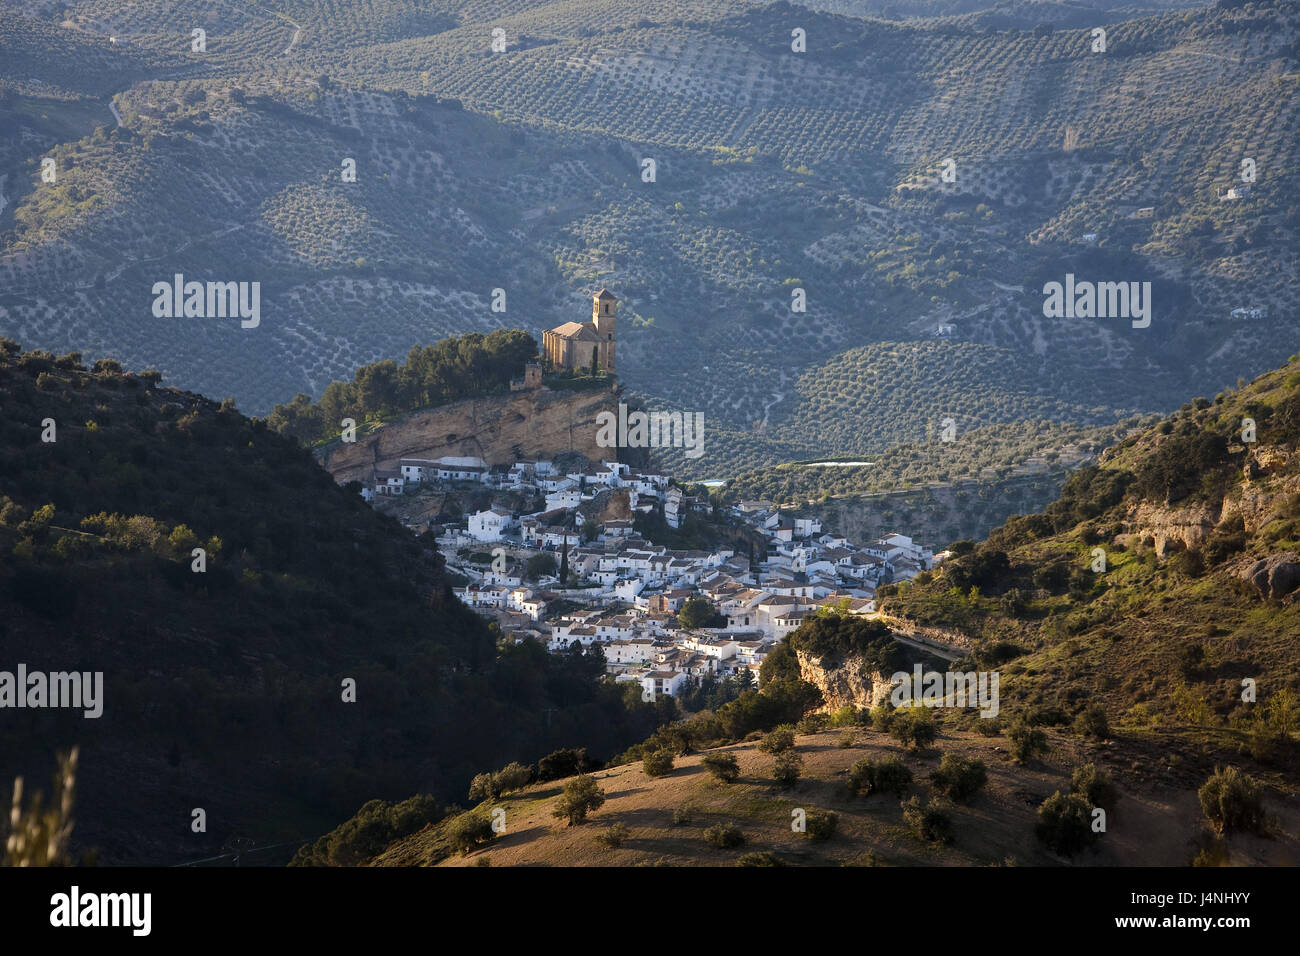 Spain, Andalusia, Montefrio, local view, Stock Photo